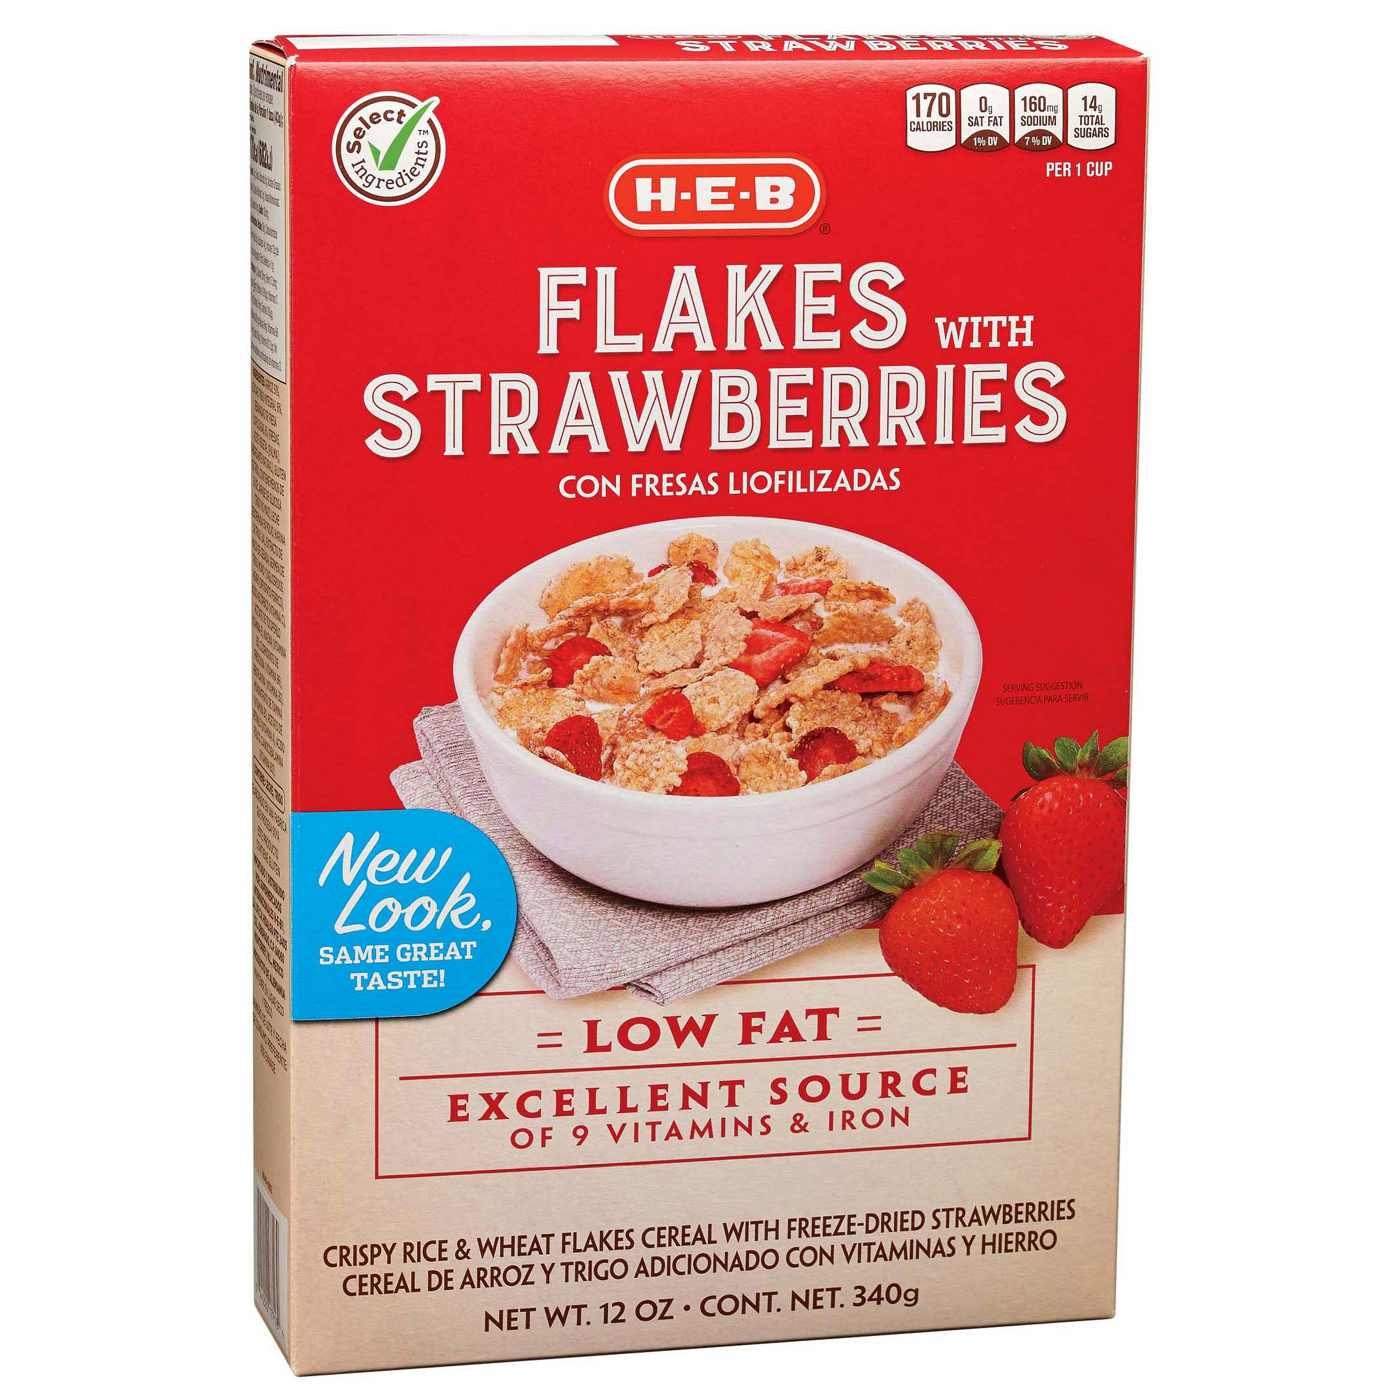 H-E-B Flakes & Strawberries Cereal; image 1 of 2